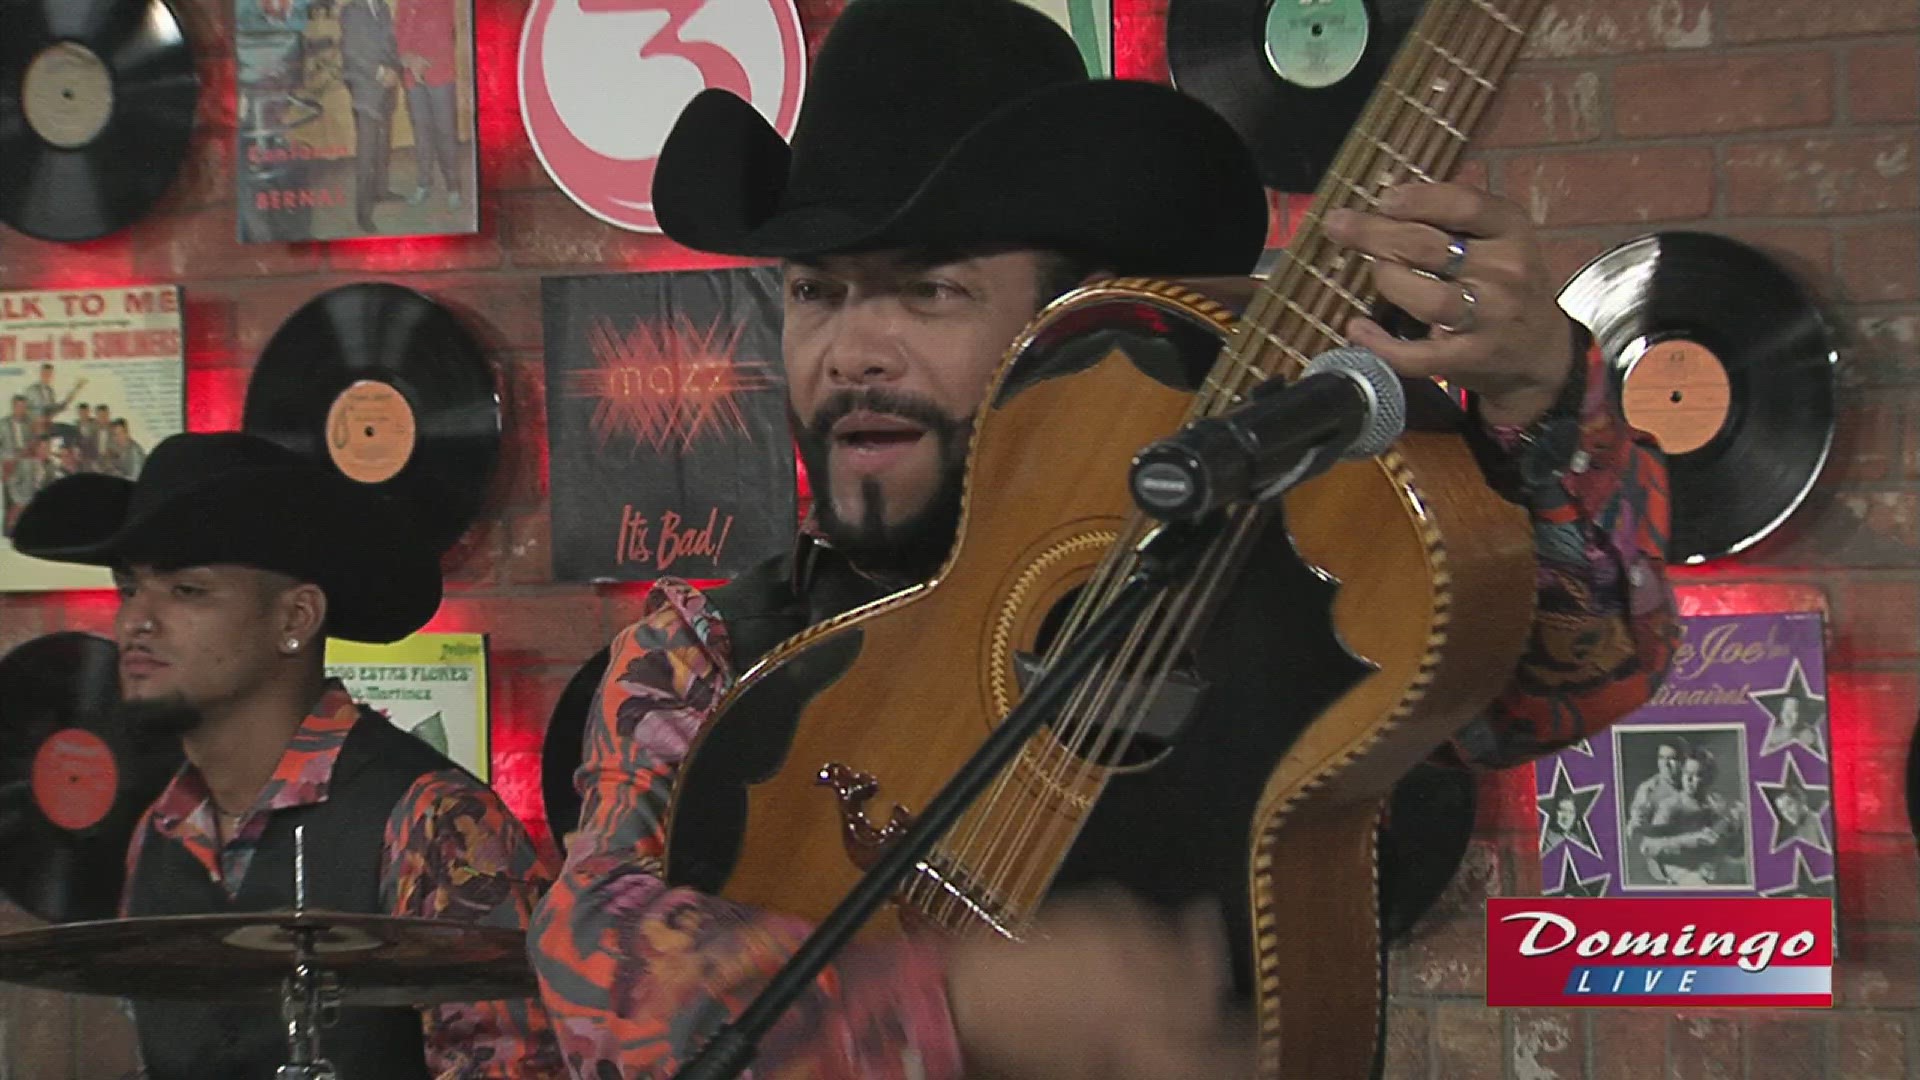 Michael Salgado joined us on Domingo Live to perform his song "Tormento Ingrato."